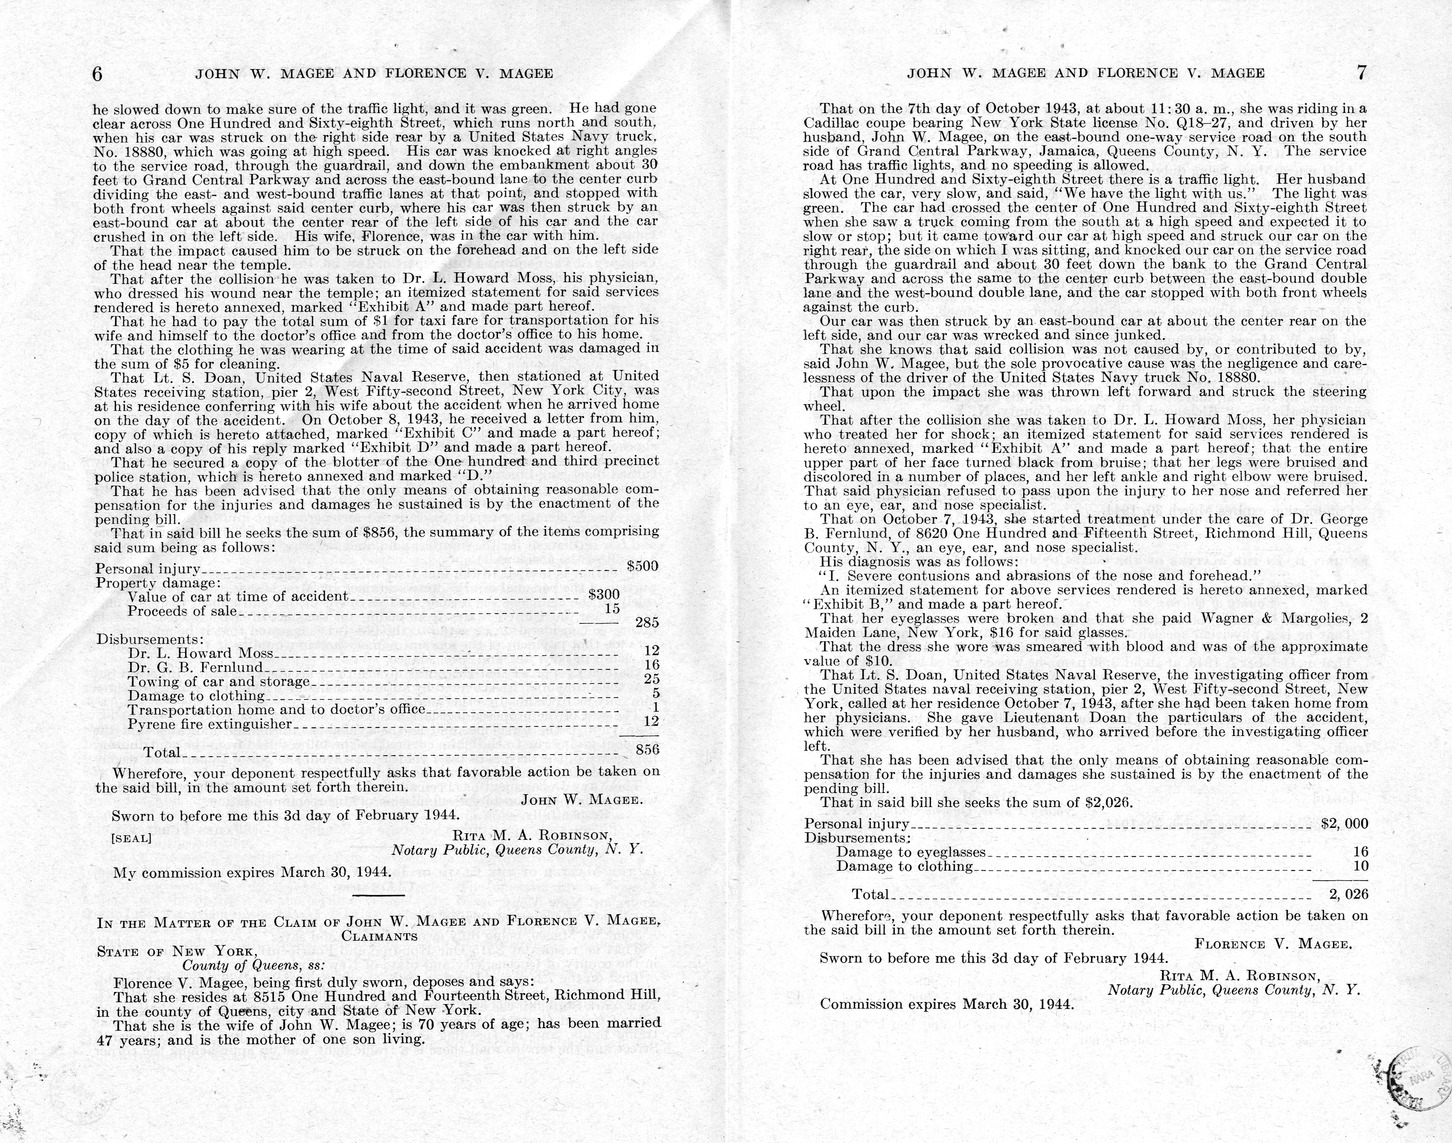 Memorandum from Harold D. Smith to M. C. Latta, H.R. 2154, For the Relief of John W. Magee and and Florence V. Magee, with Attachments